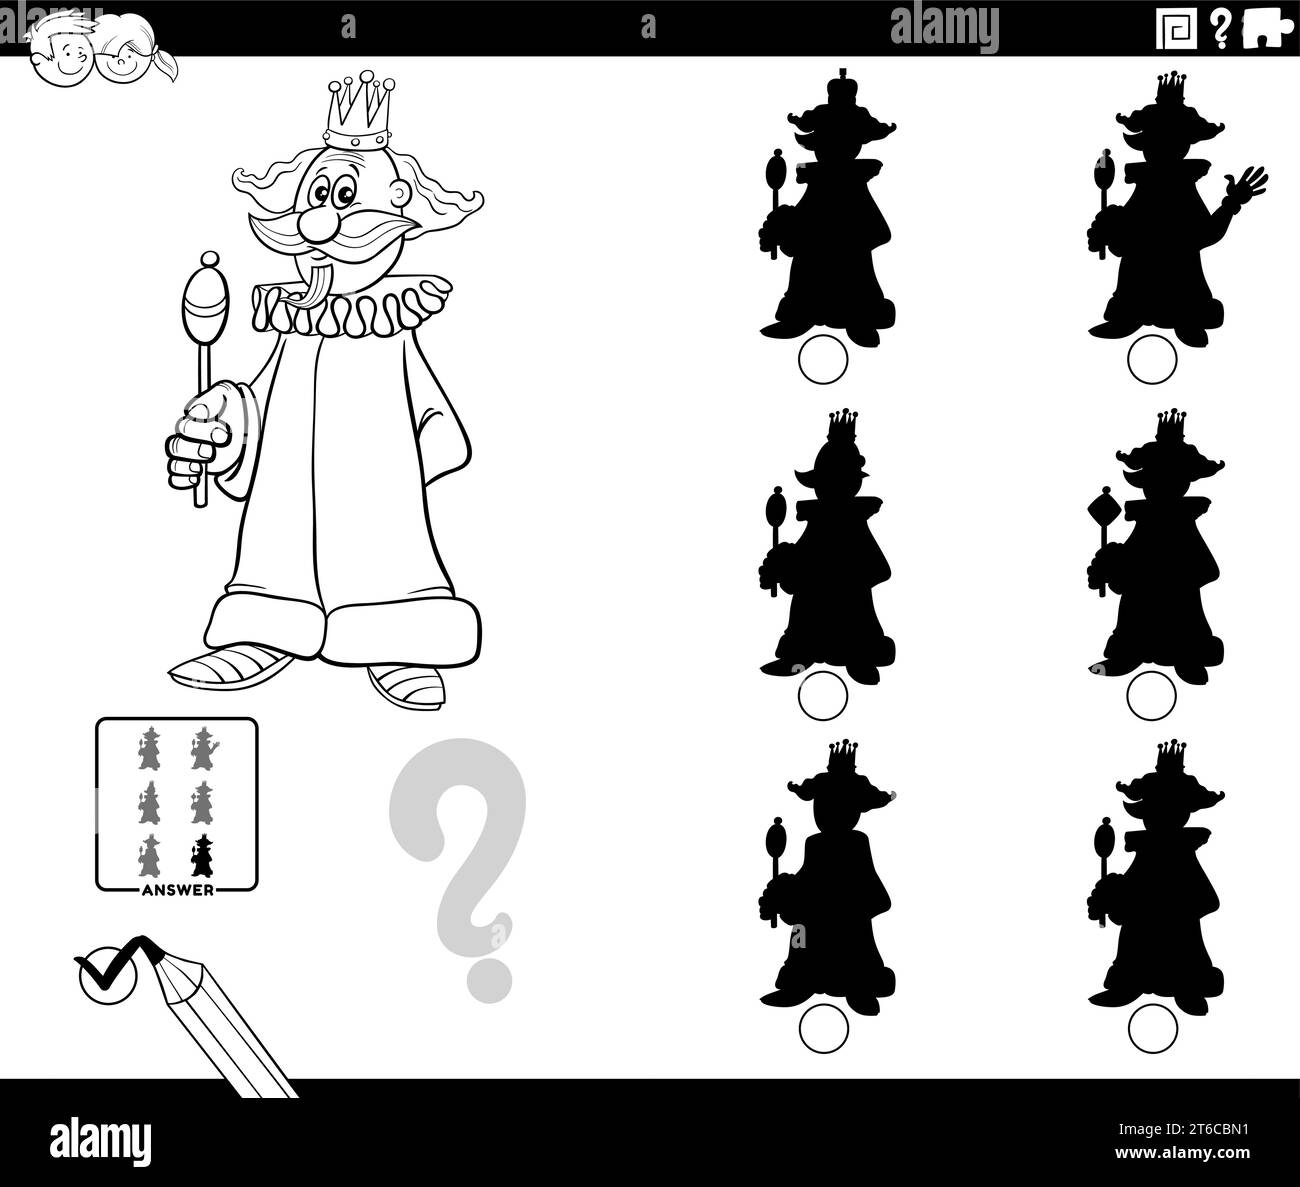 cartoon illustration of finding the right picture to the shadow educational game with king character coloring page Stock Vector